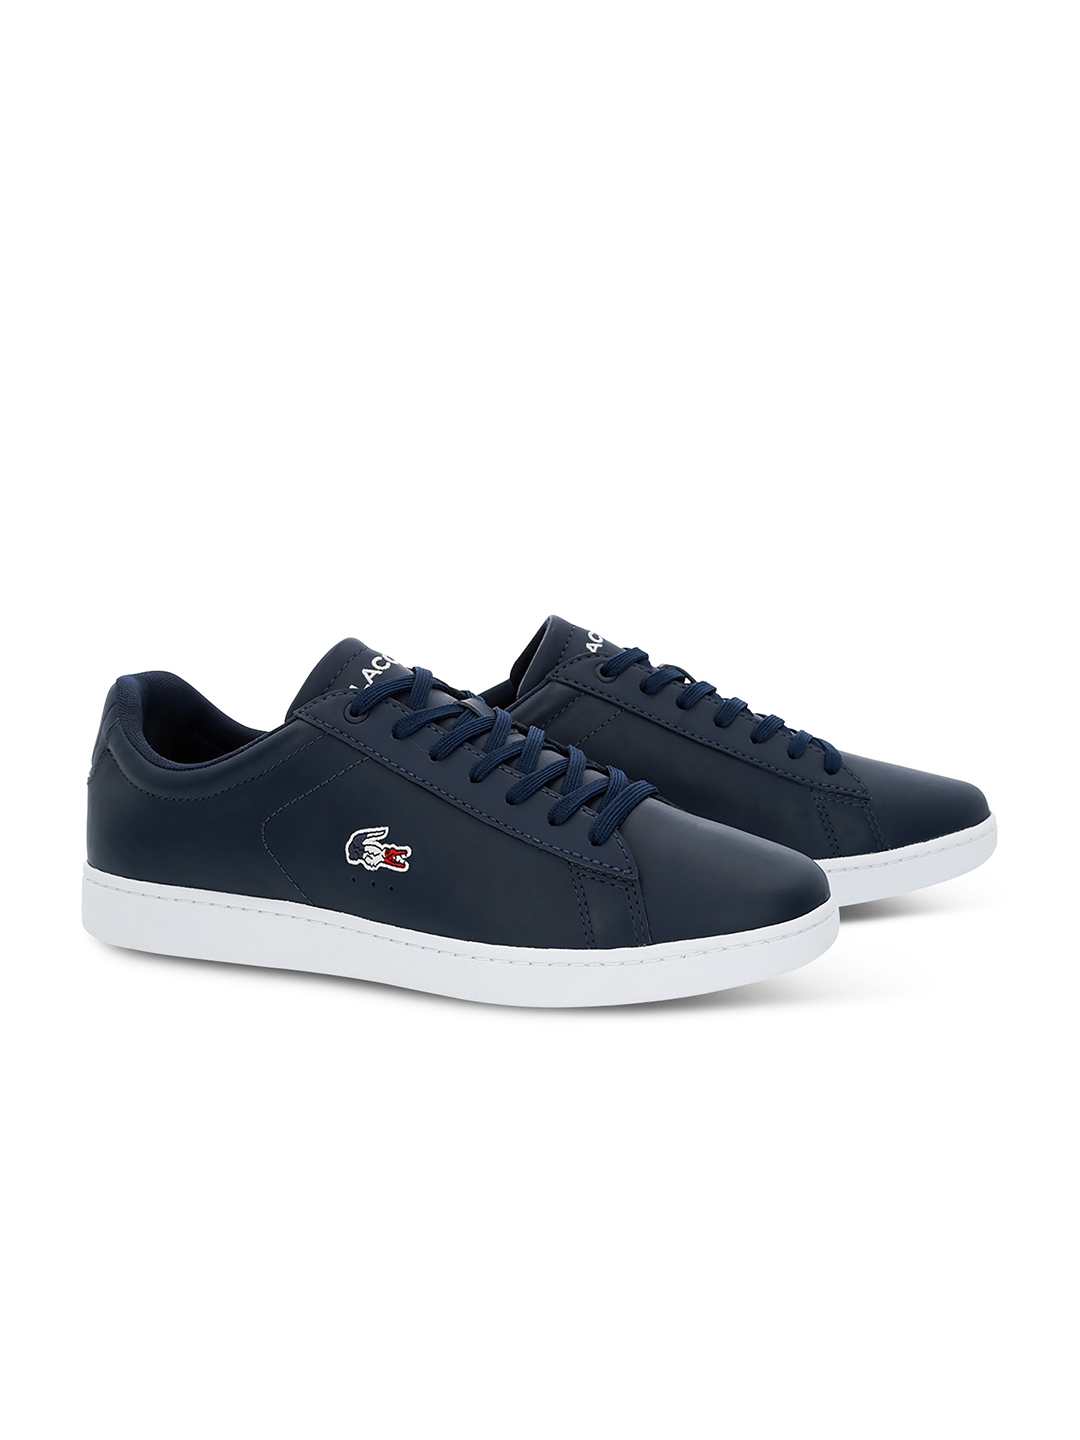 Buy Men Navy Blue Training Shoes - Sports Shoes for Men 8985777 | Myntra